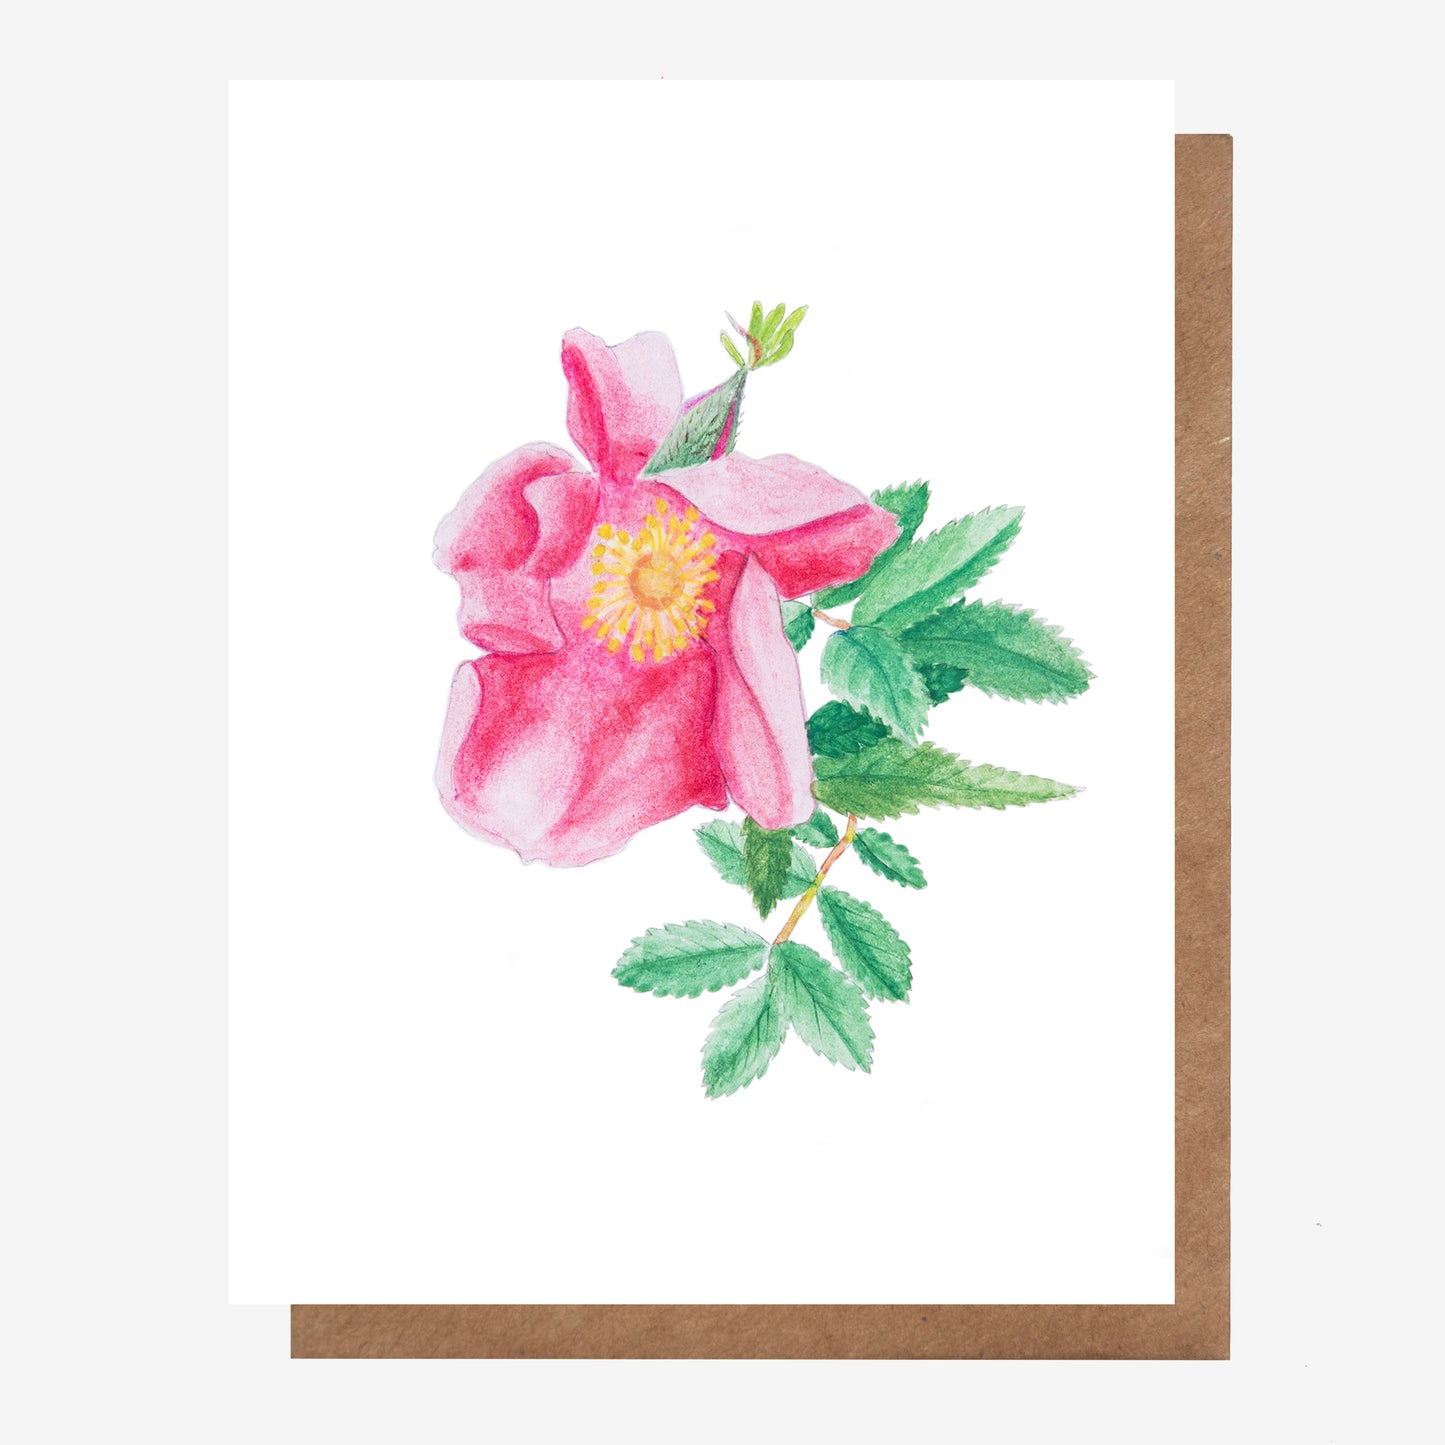 Hand drawn Wild Rose greeting card perfect for any occasion, made in Nova Scotia, Canada by Coastal Card Co.